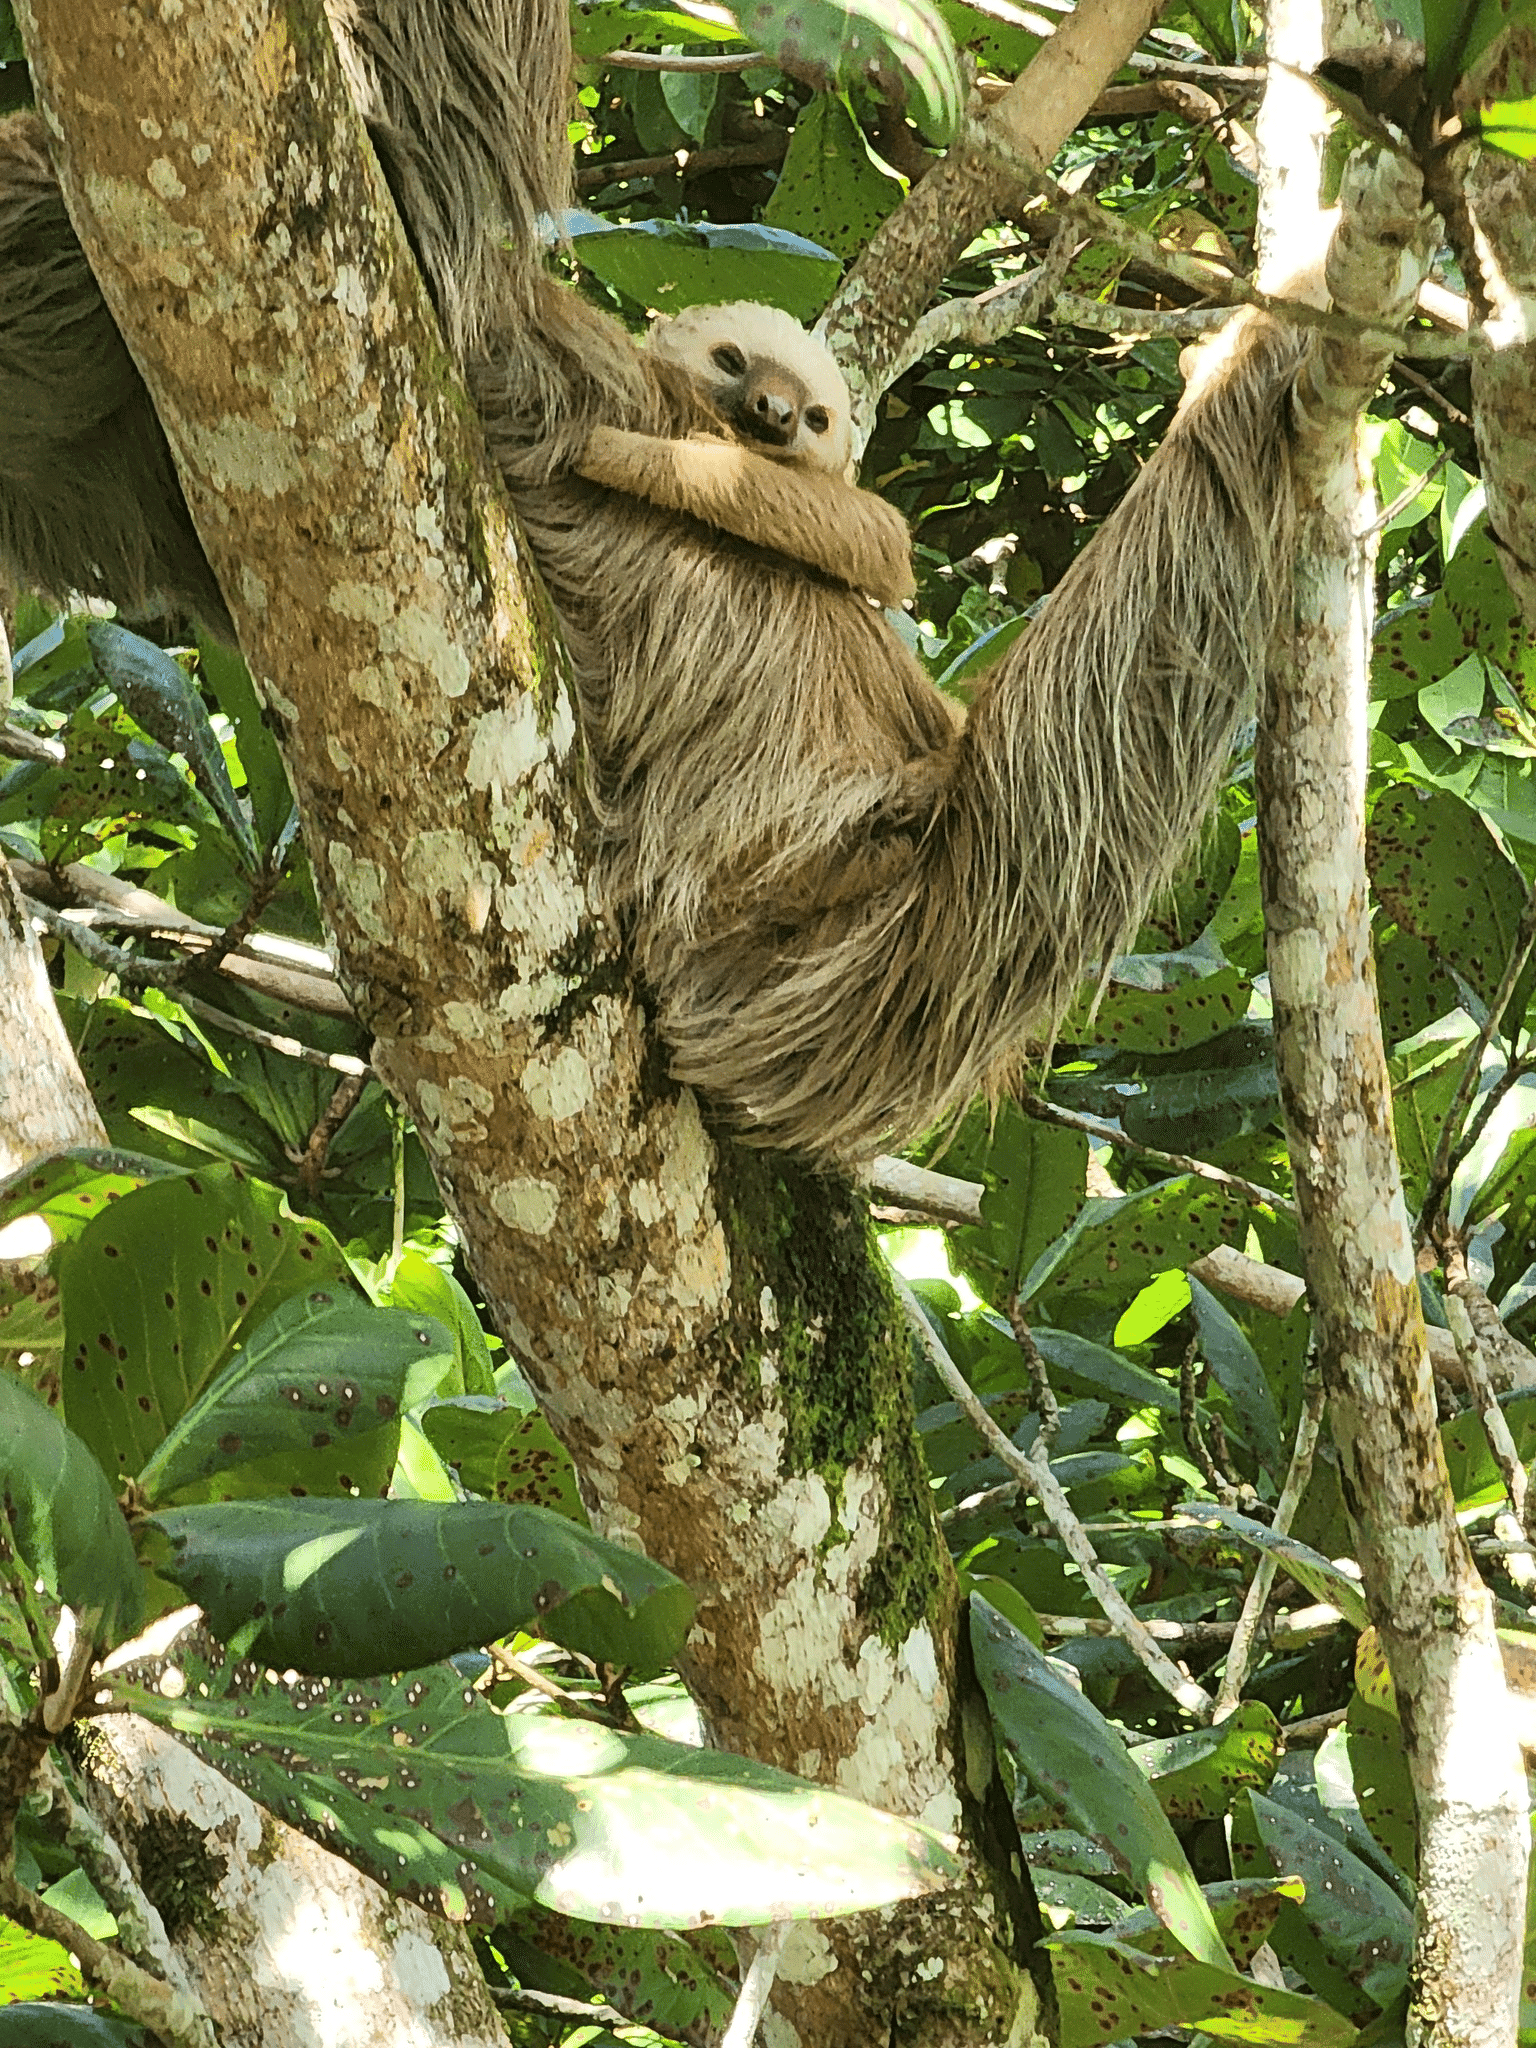 Lots of wildlife spotted during an Eco-Jungle Cruise — a blue heron, an iguana sporting his Christmas hat and a handsome sloth perched high in the treetops.